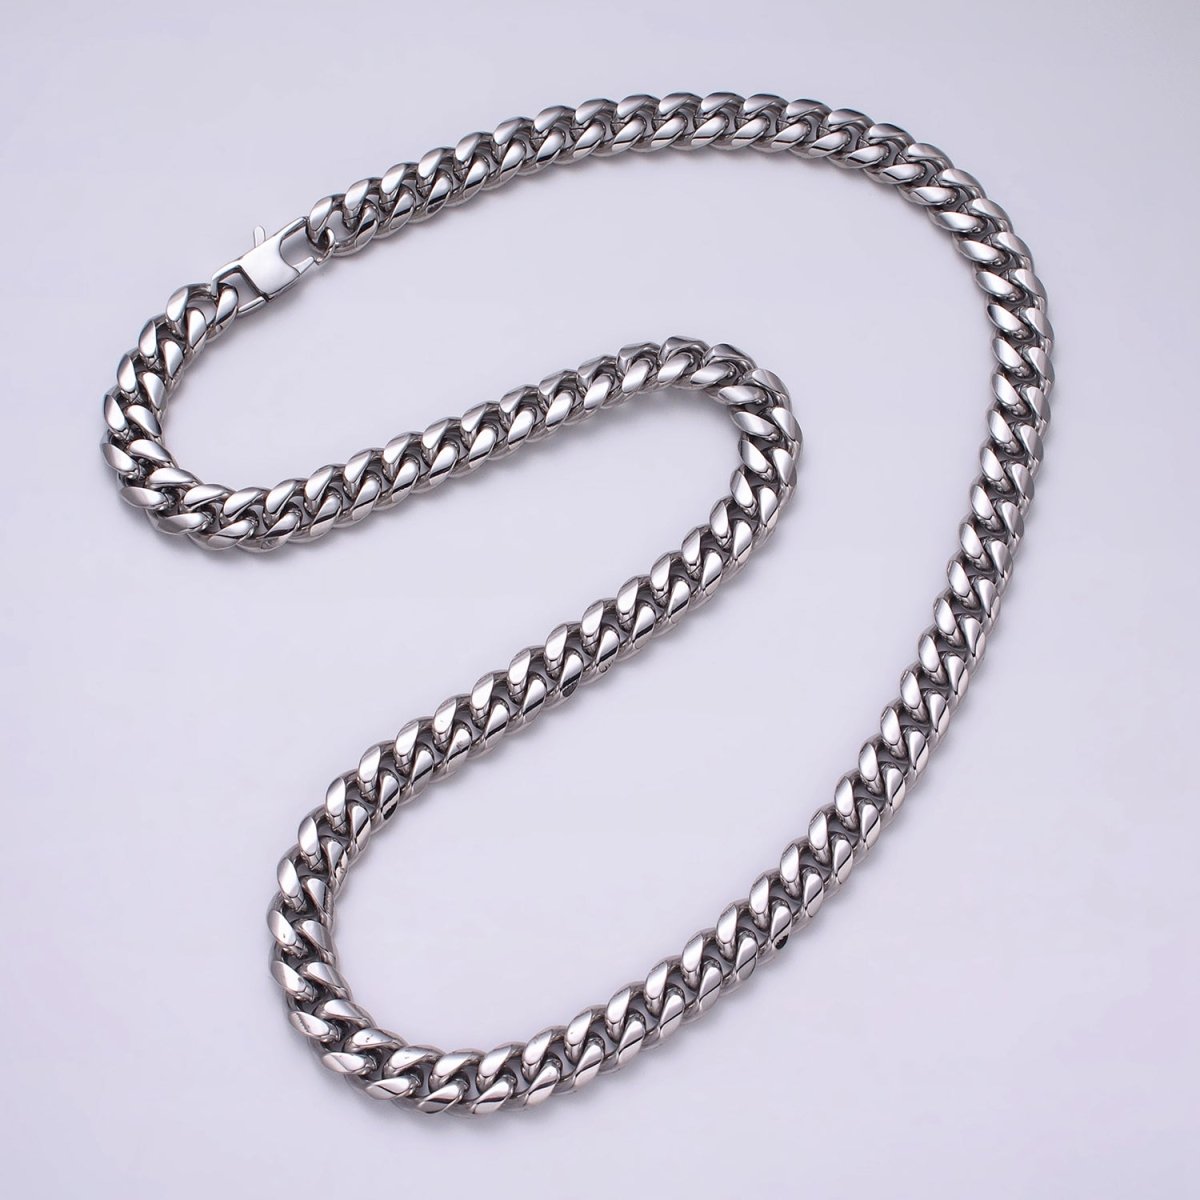 Silver Curb Chain Cuban Necklace for Men - Heavy Stainless Steel 10,12,14 mm Thickness 24.5 inch long | WA-1729 WA-1730 WA-1731 Clearance Pricing - DLUXCA